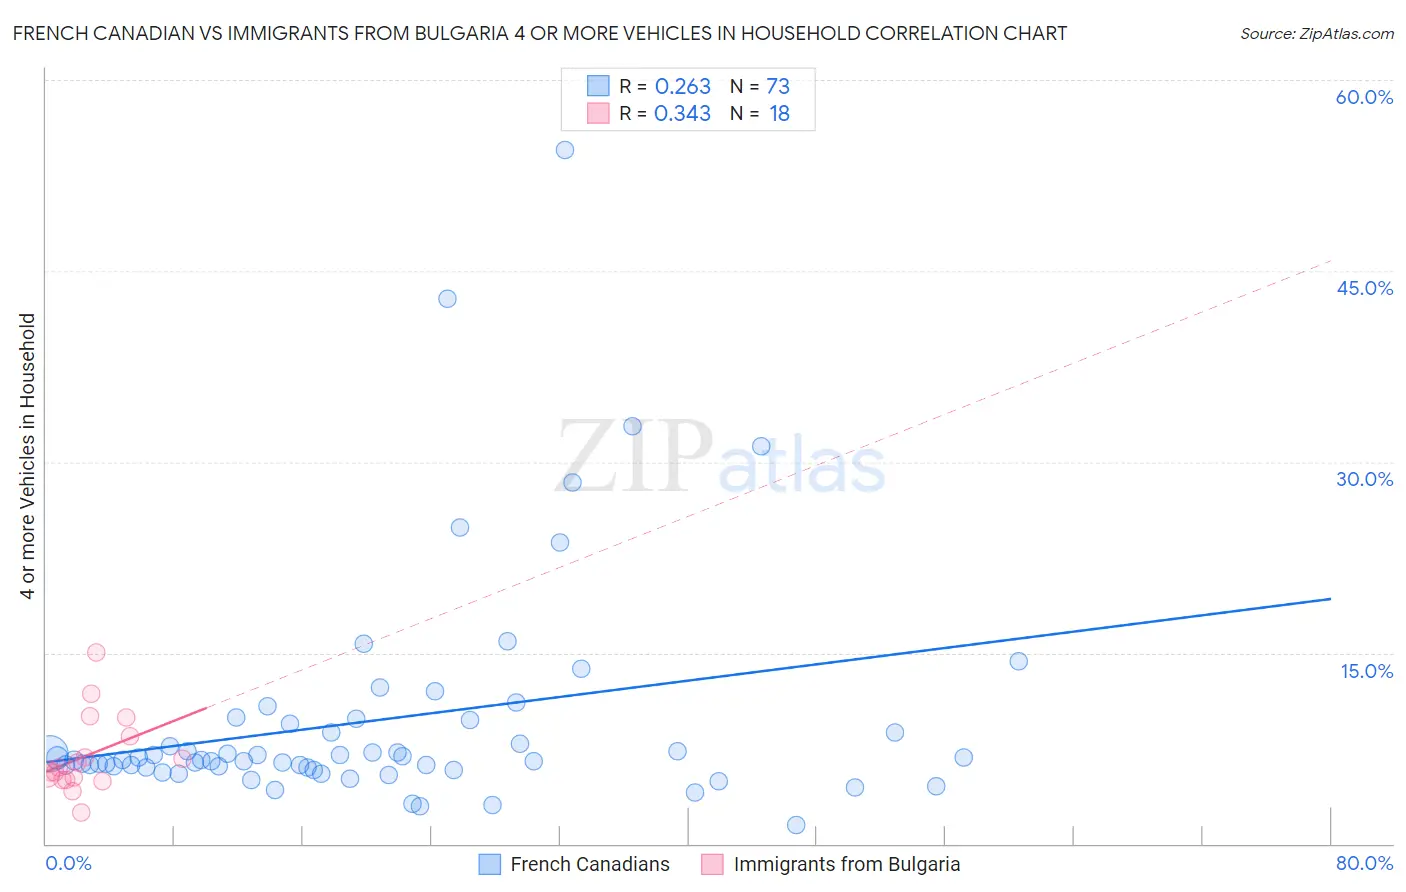 French Canadian vs Immigrants from Bulgaria 4 or more Vehicles in Household